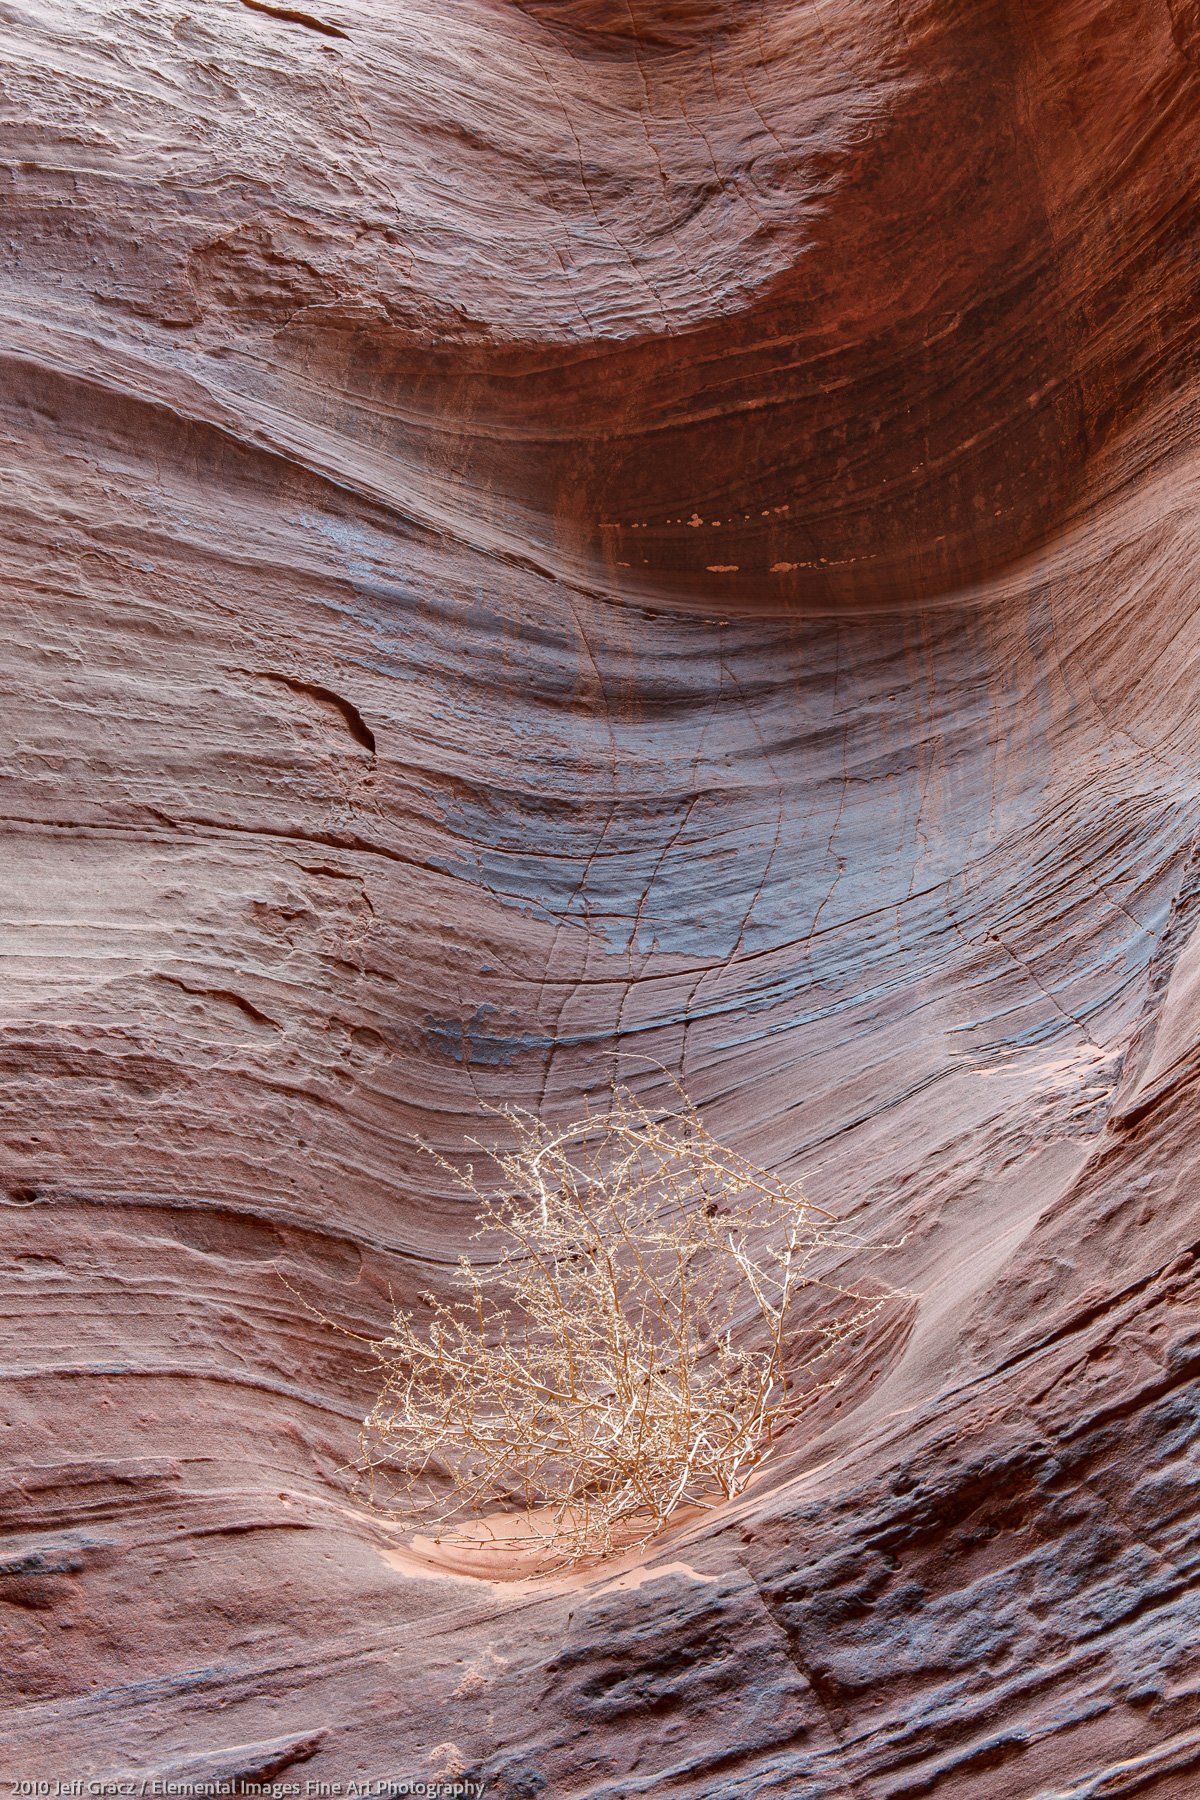 Tumbleweed in Slot Canyon | Paria Canyon / Vermillion Cliffs Wilderness | UT | USA - © 2010 Jeff Gracz / Elemental Images Fine Art Photography - All Rights Reserved Worldwide